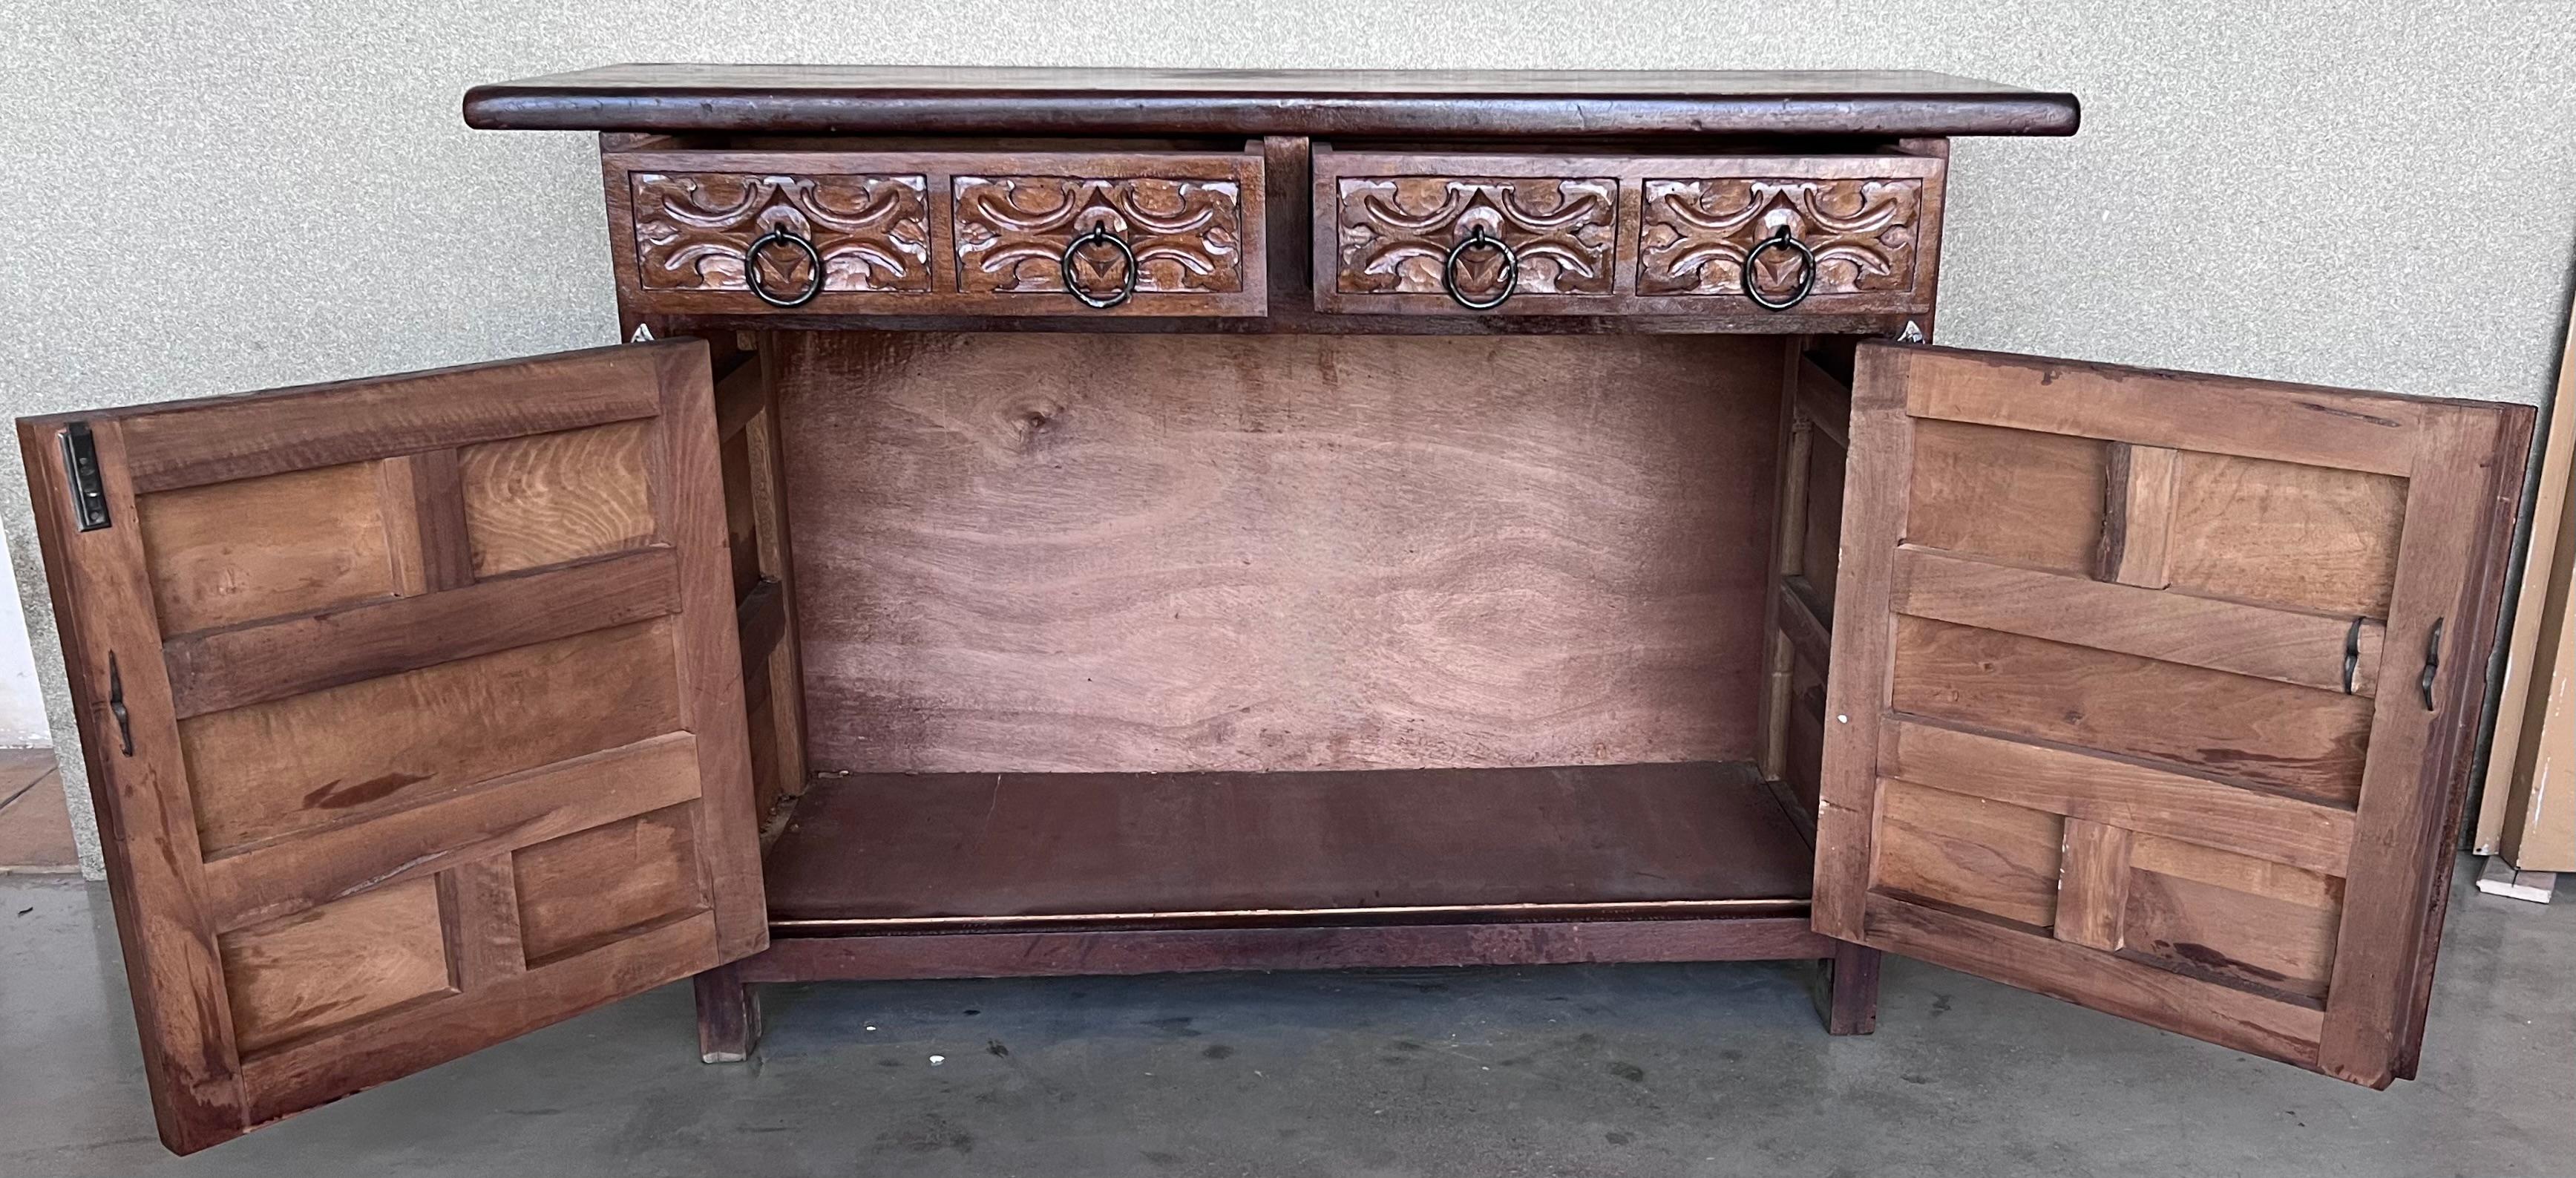 20th Century Spanish Carved Walnut Tuscan Credenza or Buffet with Two Drawers For Sale 2